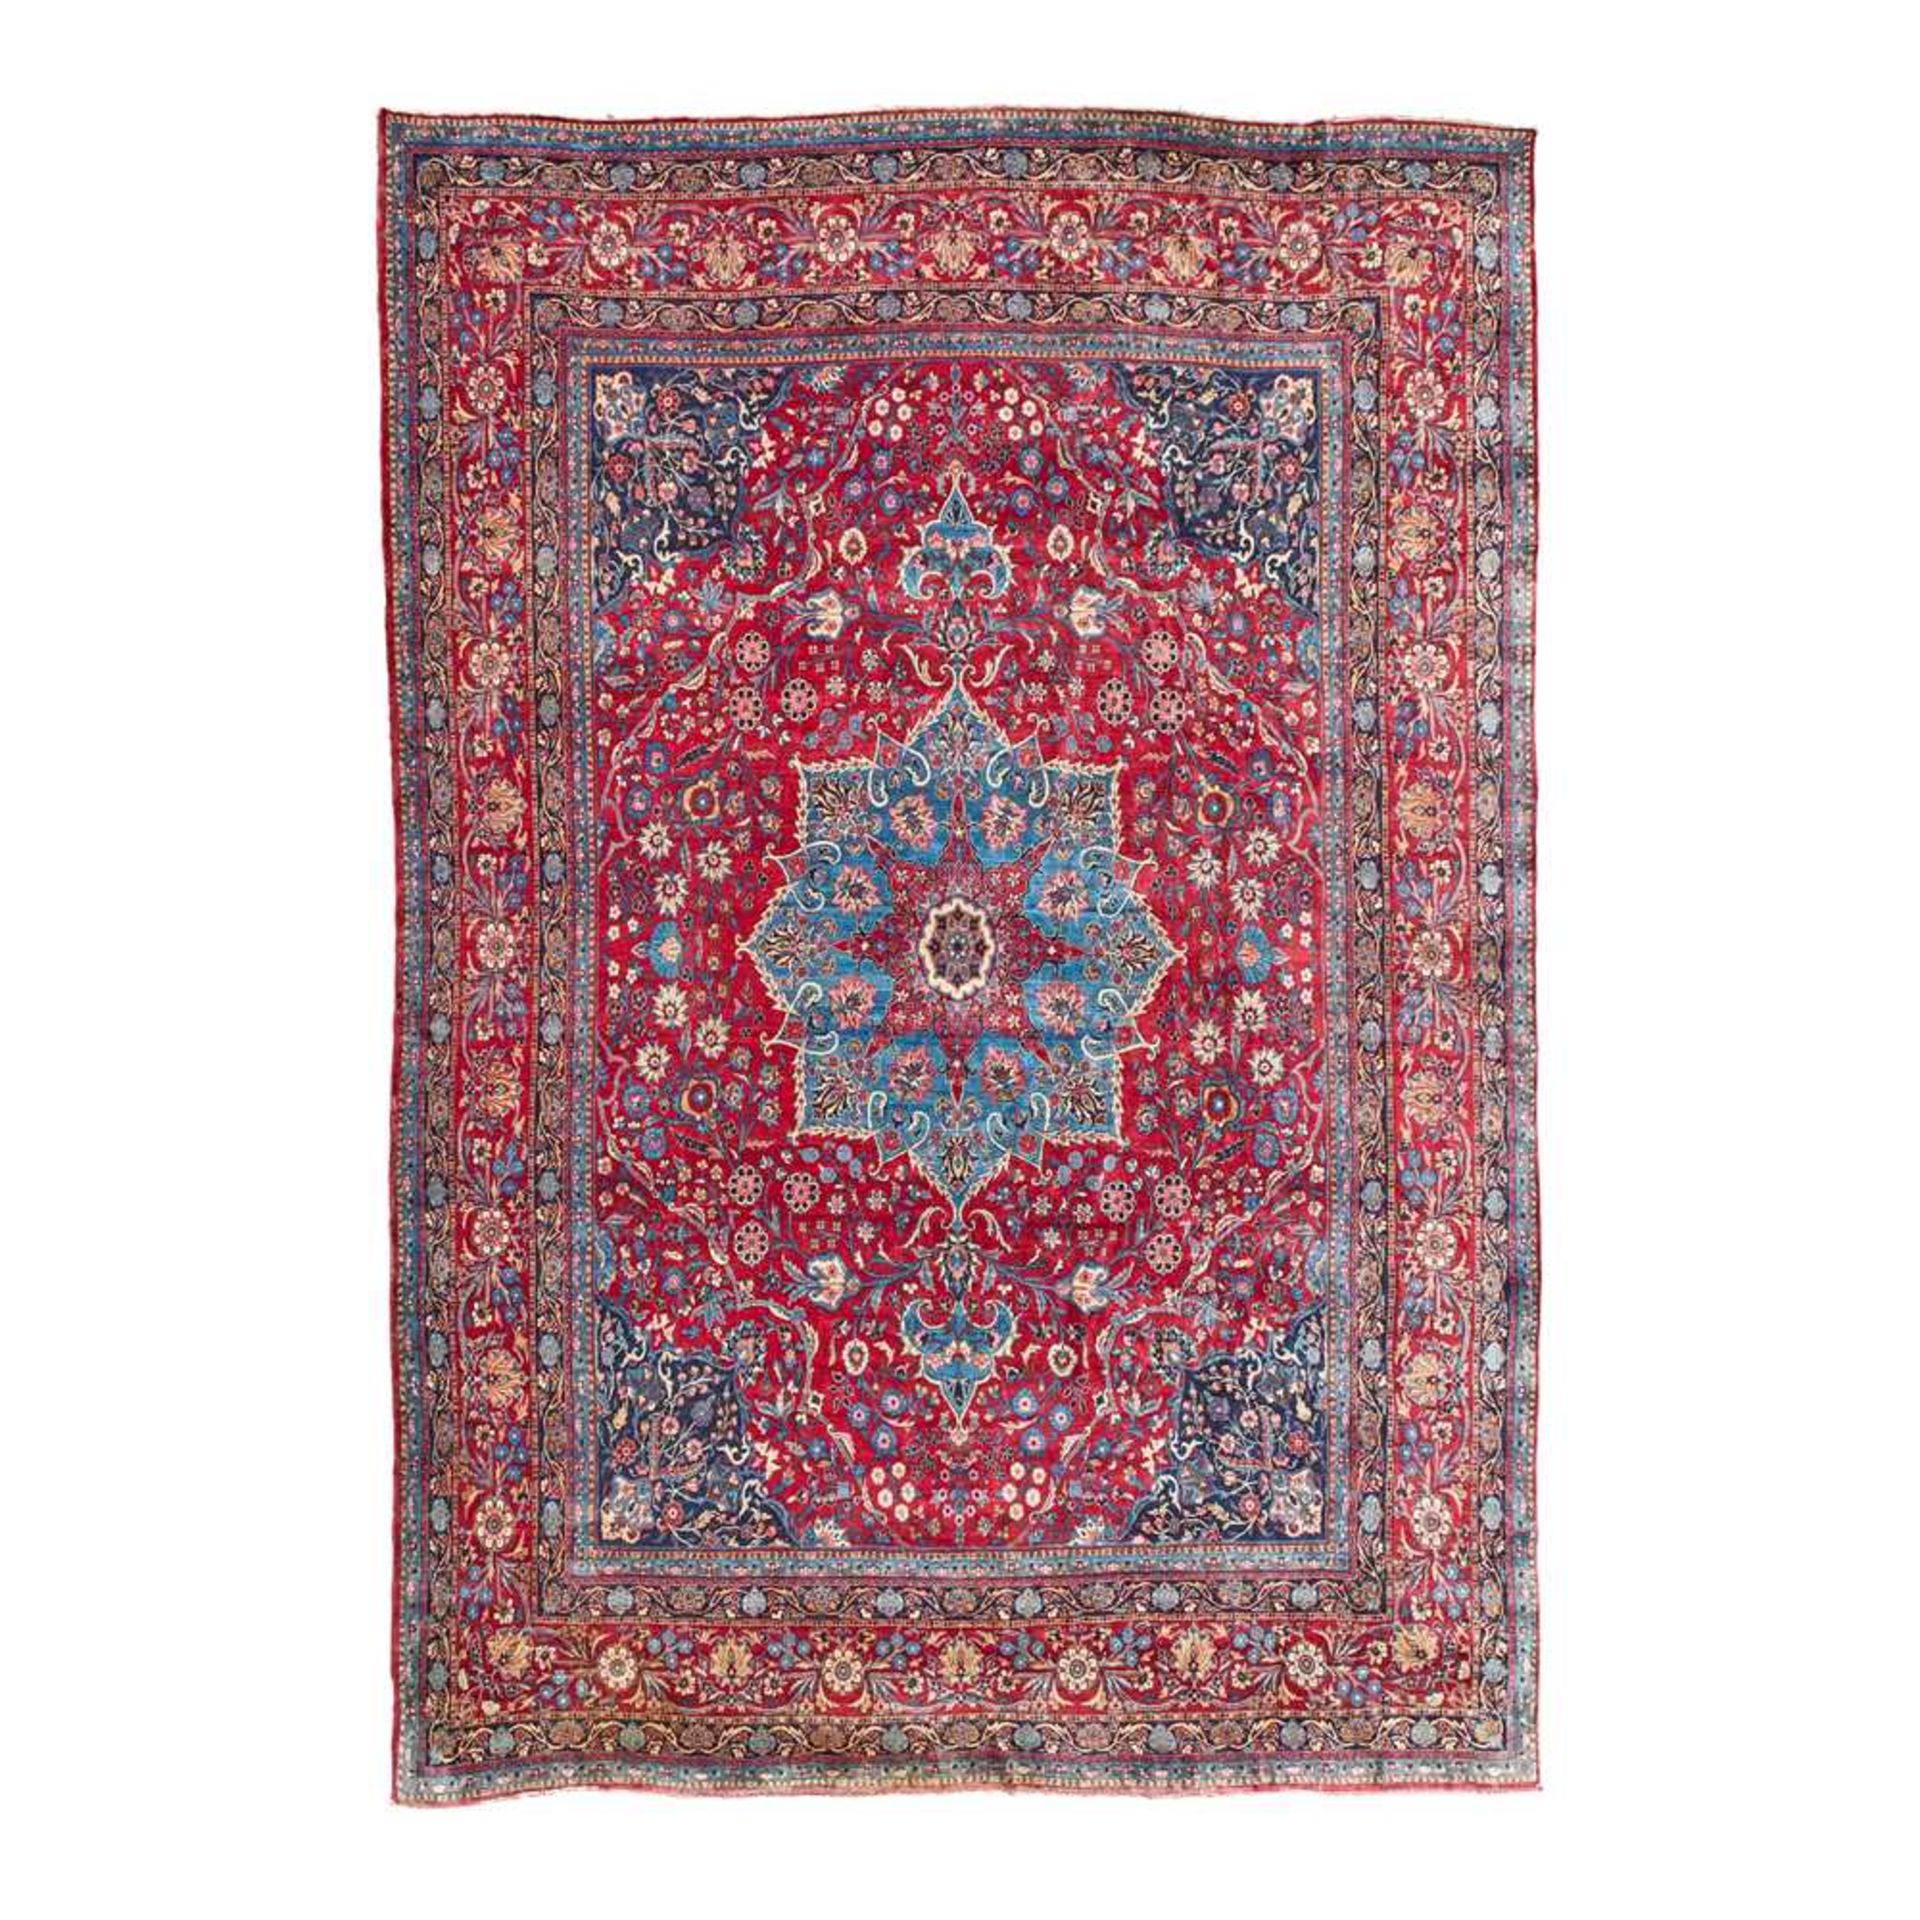 KIRMAN CARPET CENTRAL PERSIA, EARLY 20TH CENTURY